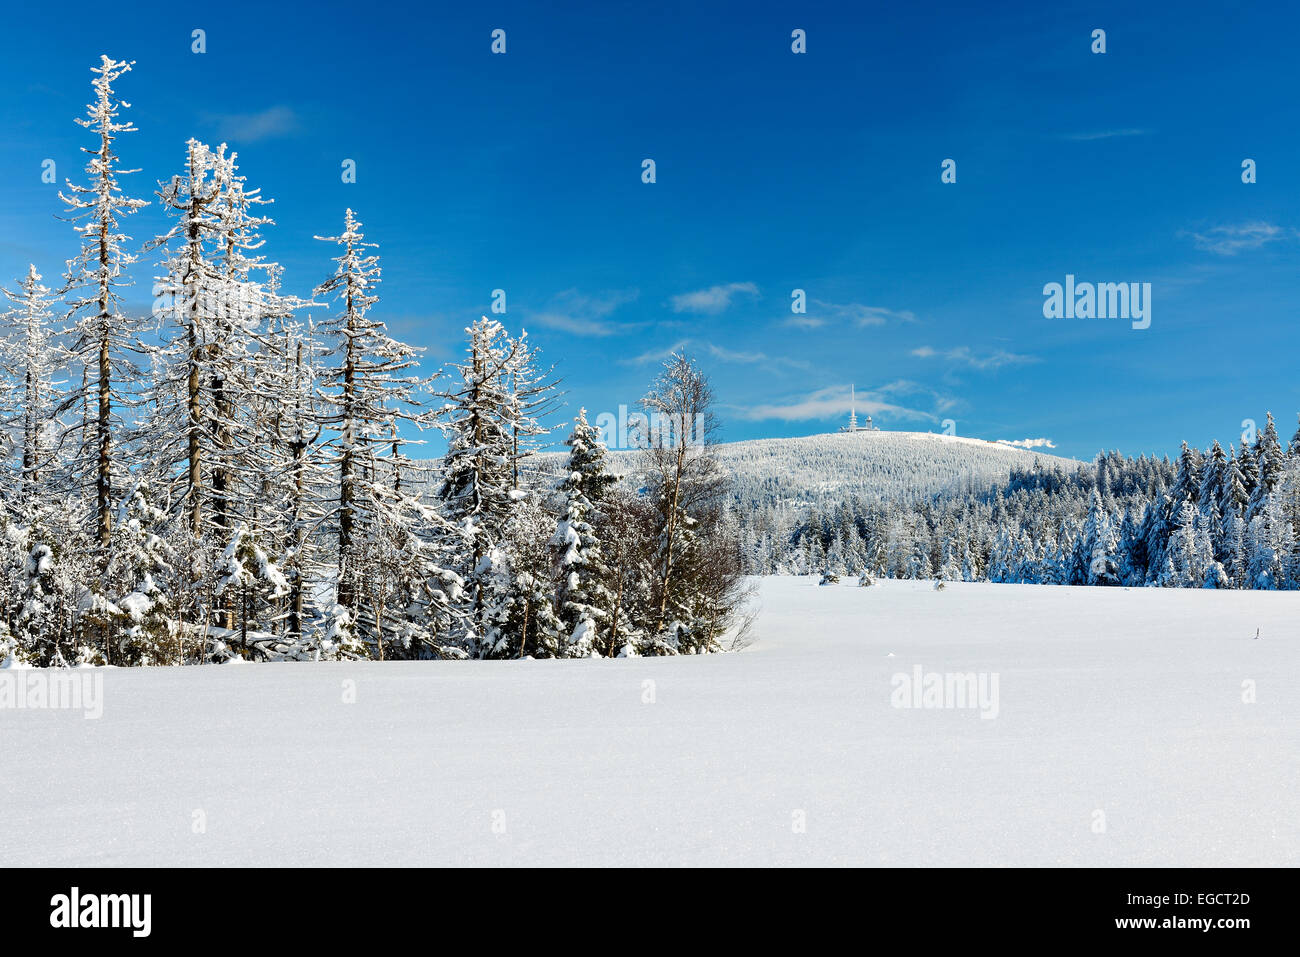 Snow-covered winter landscape, Mt Brocken at the back, Harz National Park, near Torfhaus, Lower Saxony, Germany Stock Photo